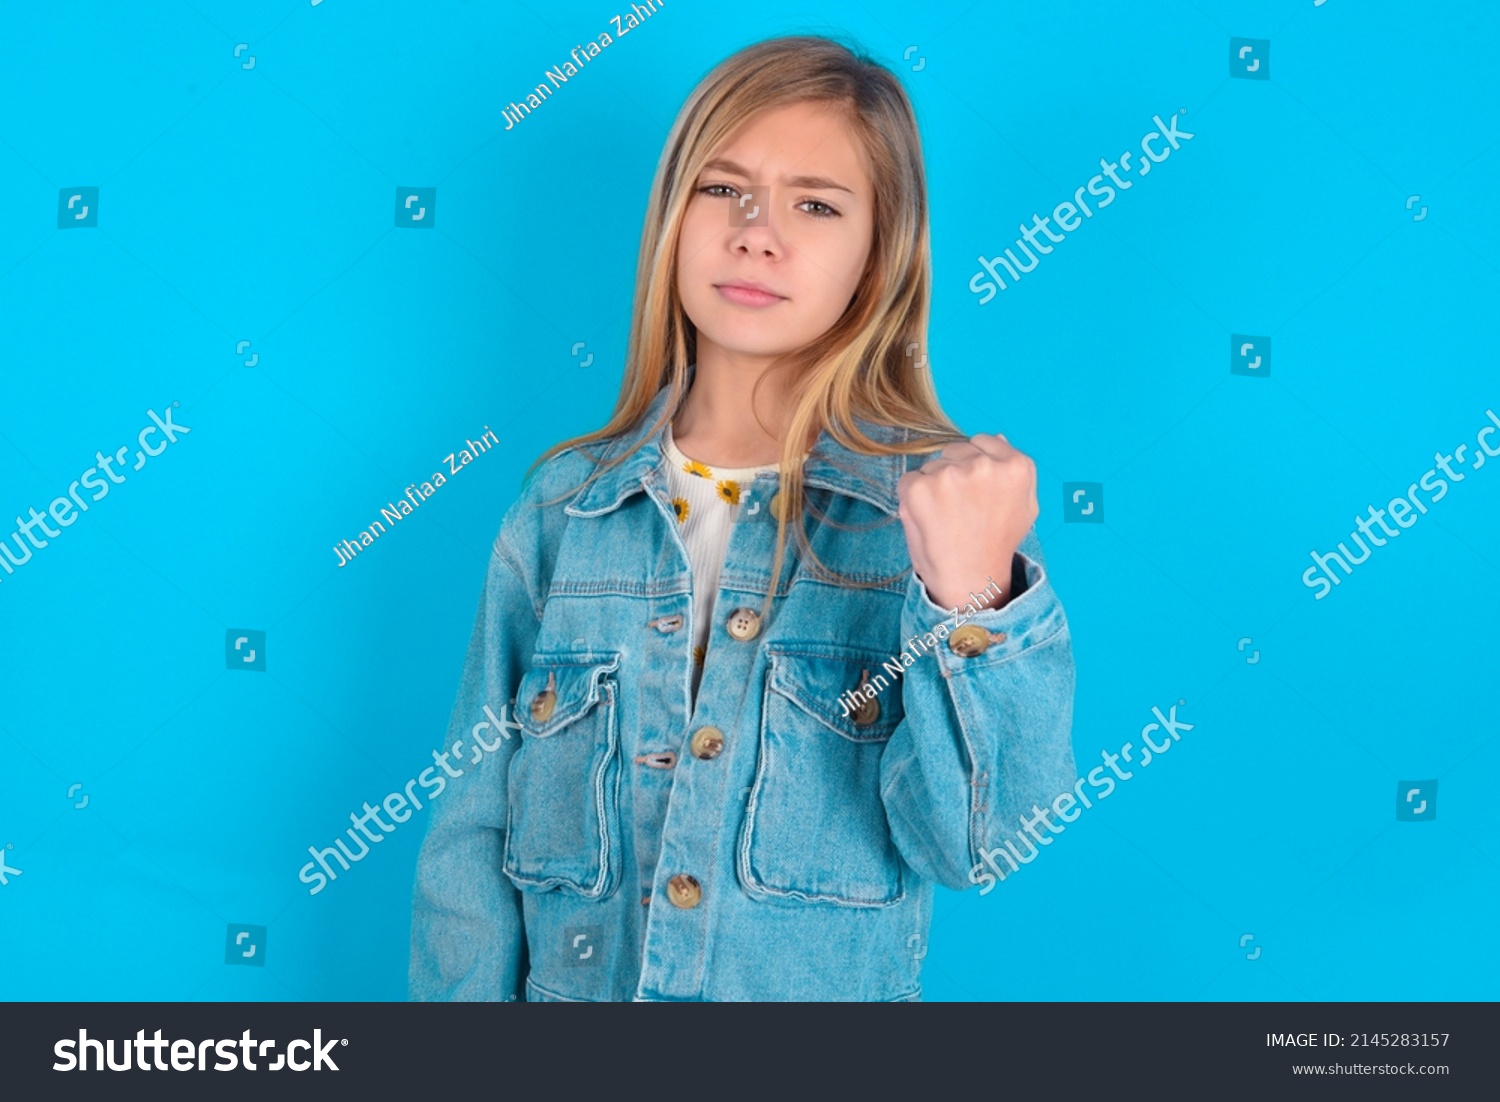 blonde little kid girl wearing denim jacket over blue background shows fist has annoyed face expression going to revenge or threaten someone makes serious look. I will show you who is boss #2145283157